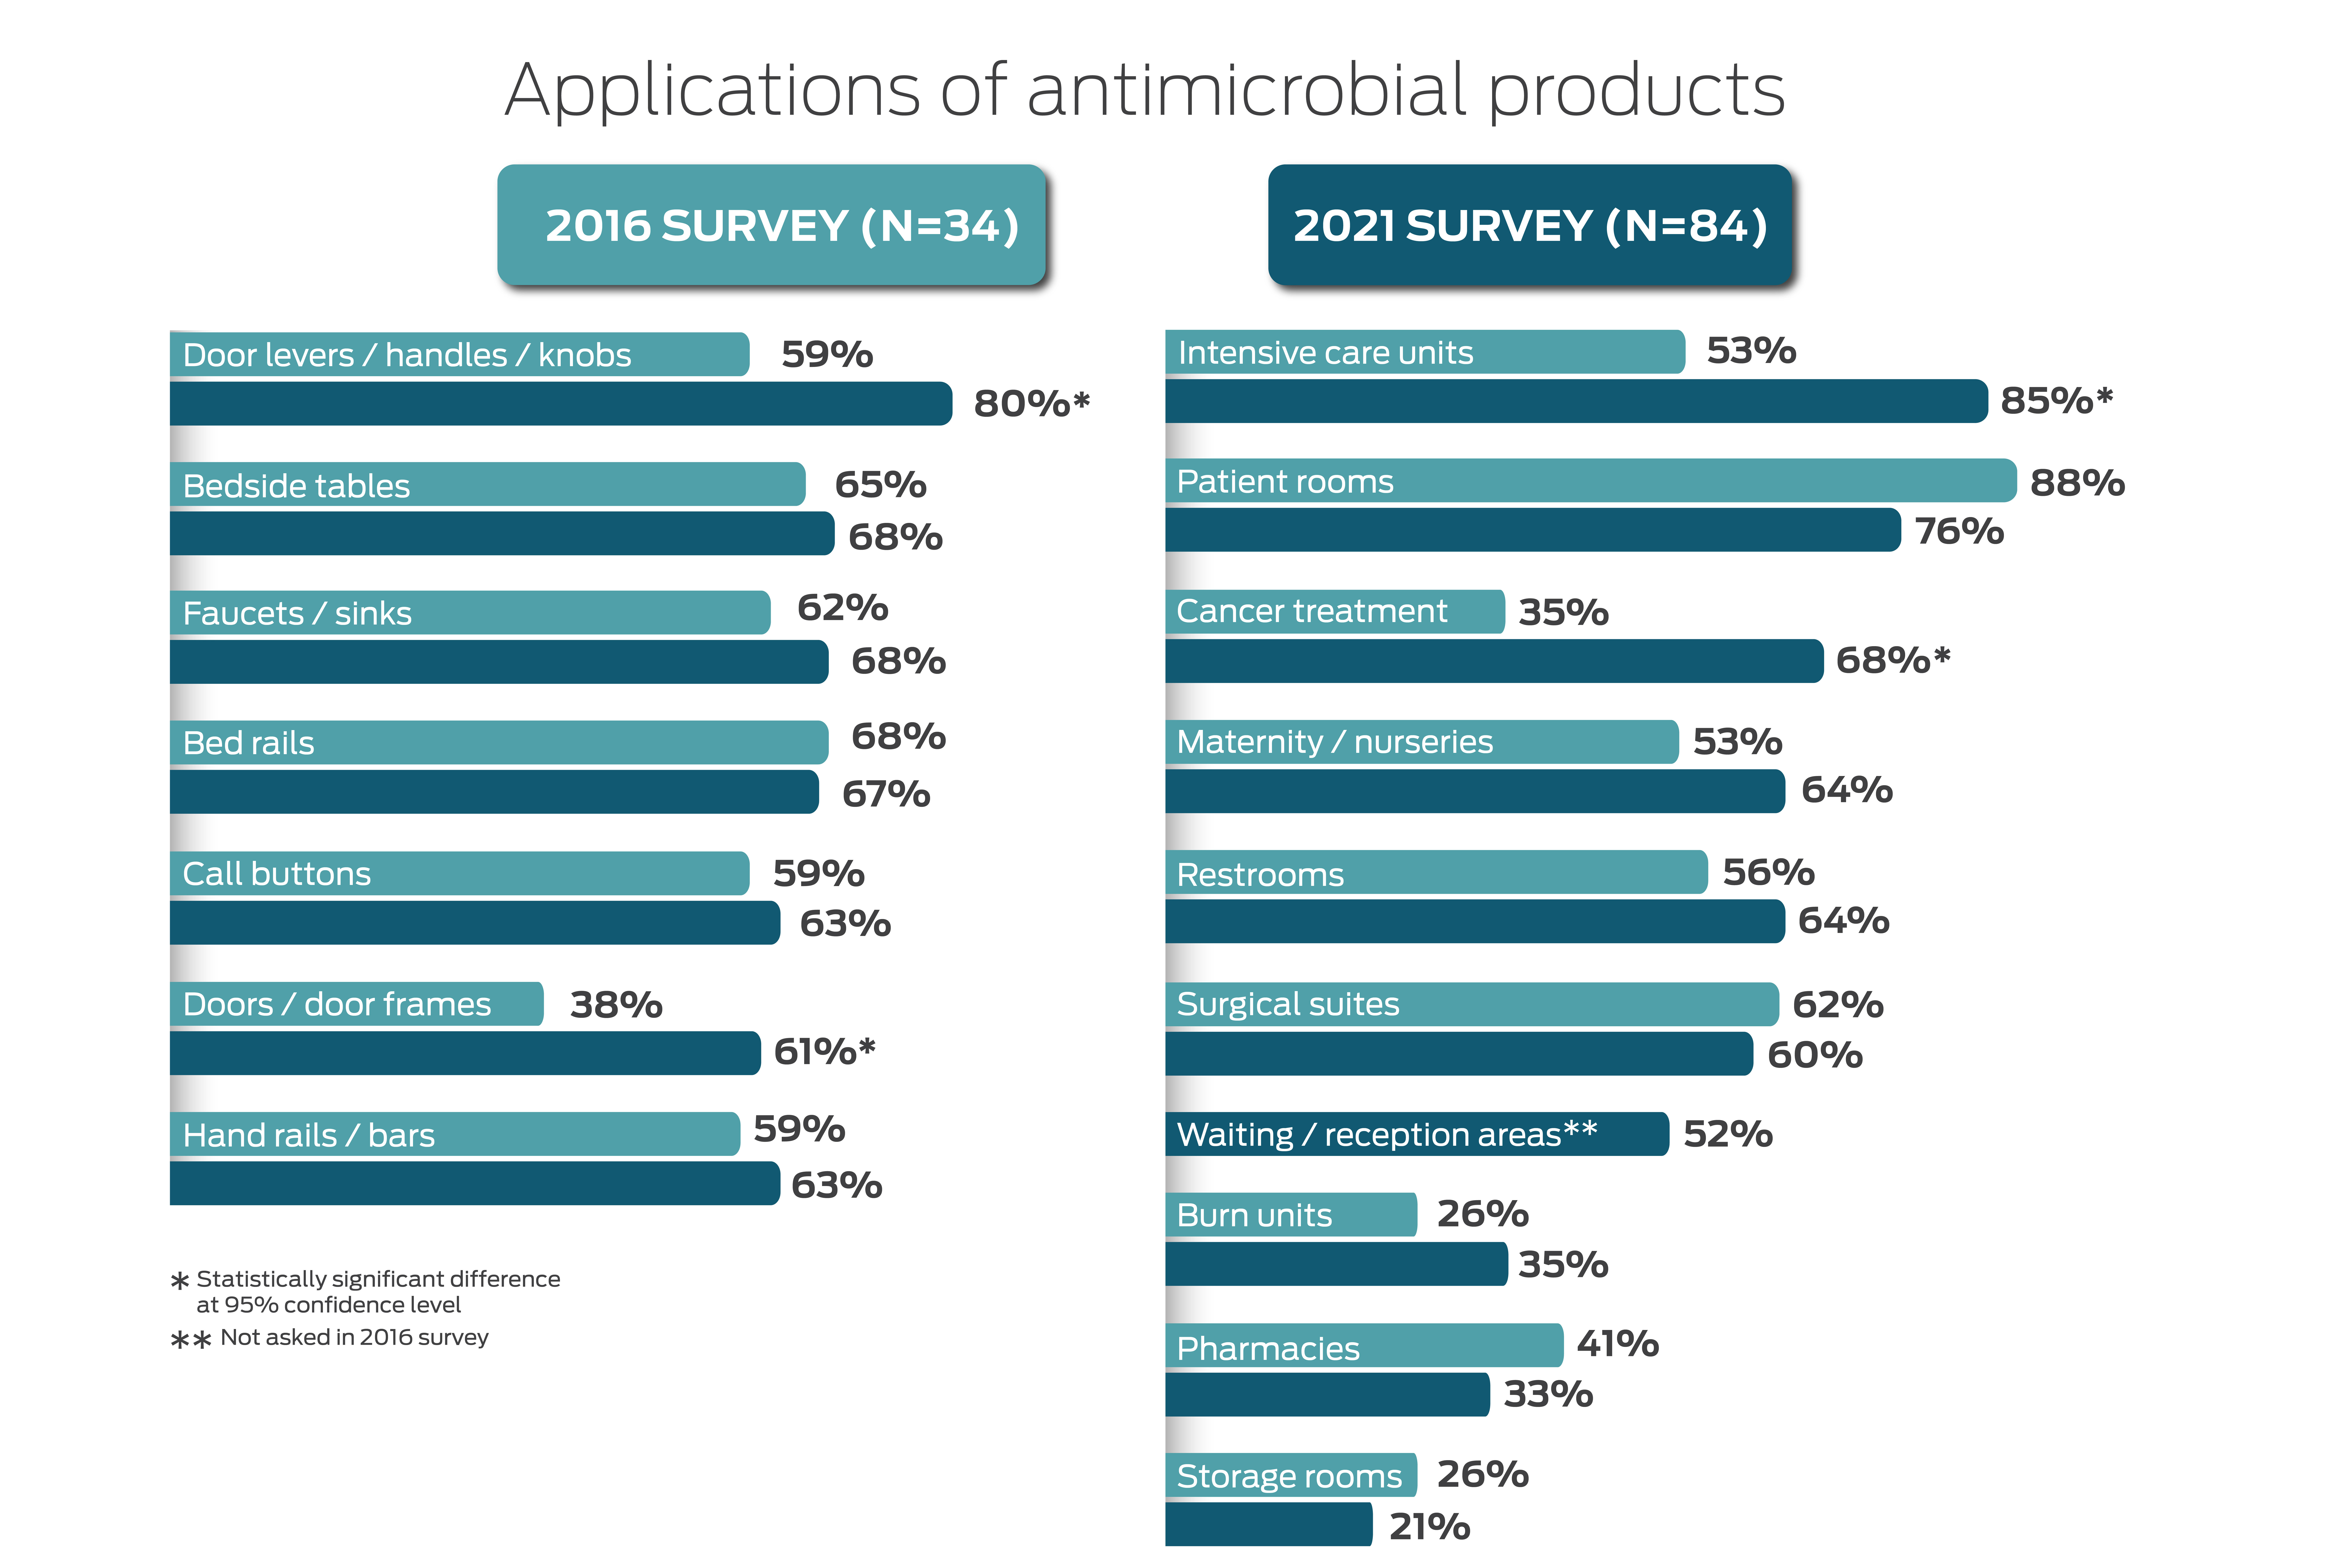 Antimicrobial applications in hospitals for infection control